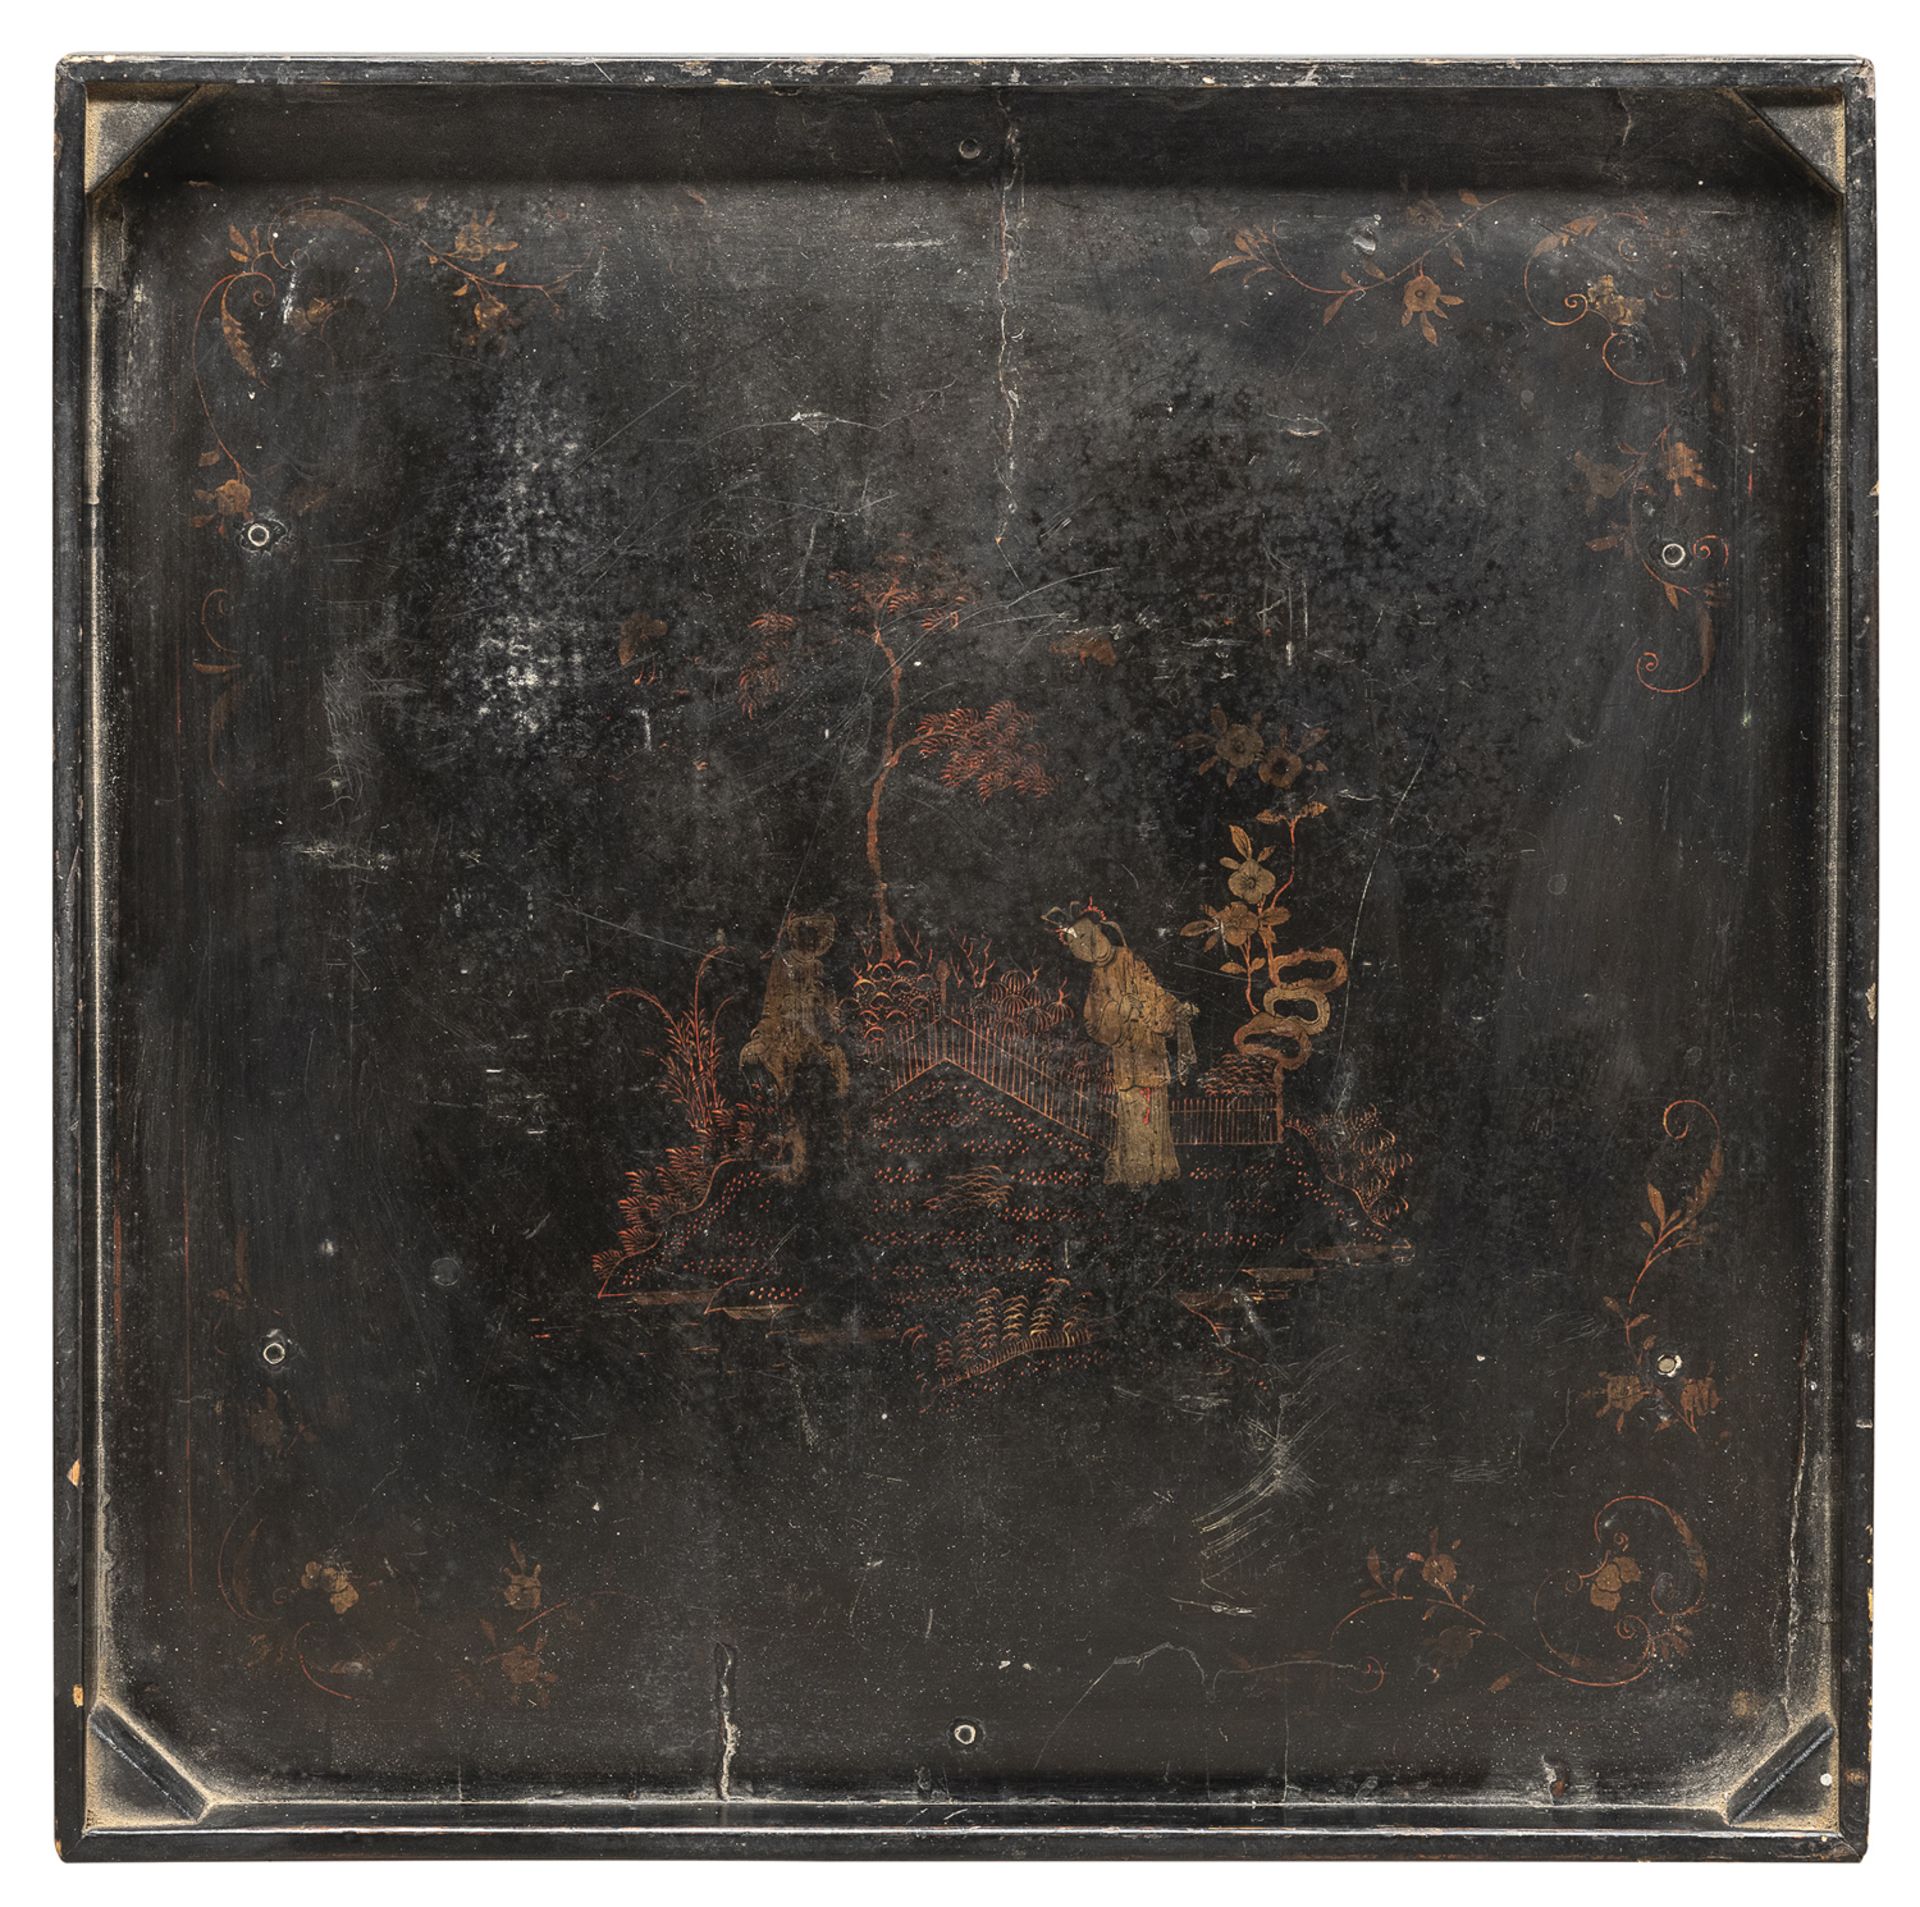 A CHINESE BLACK LACQUER WOOD TABLE 20TH CENTURY. - Image 2 of 2